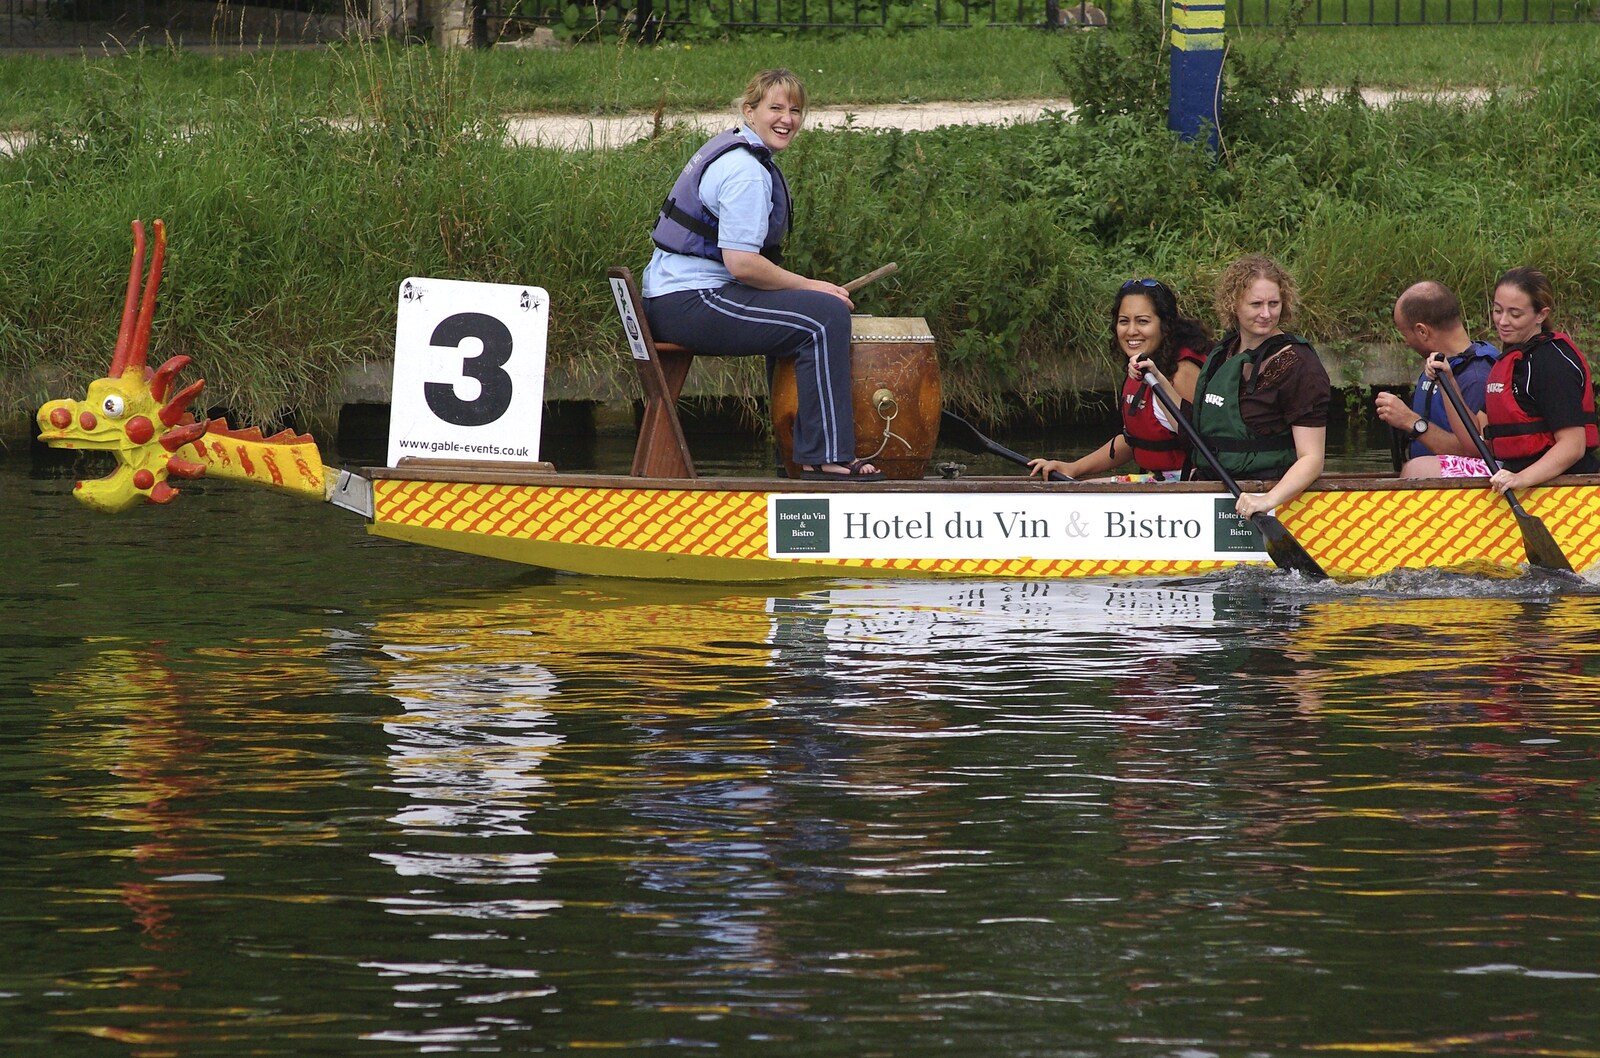 Boat number 3 drifts past from Qualcomm's Dragon-Boat Racing, Fen Ditton, Cambridge - 8th September 2007